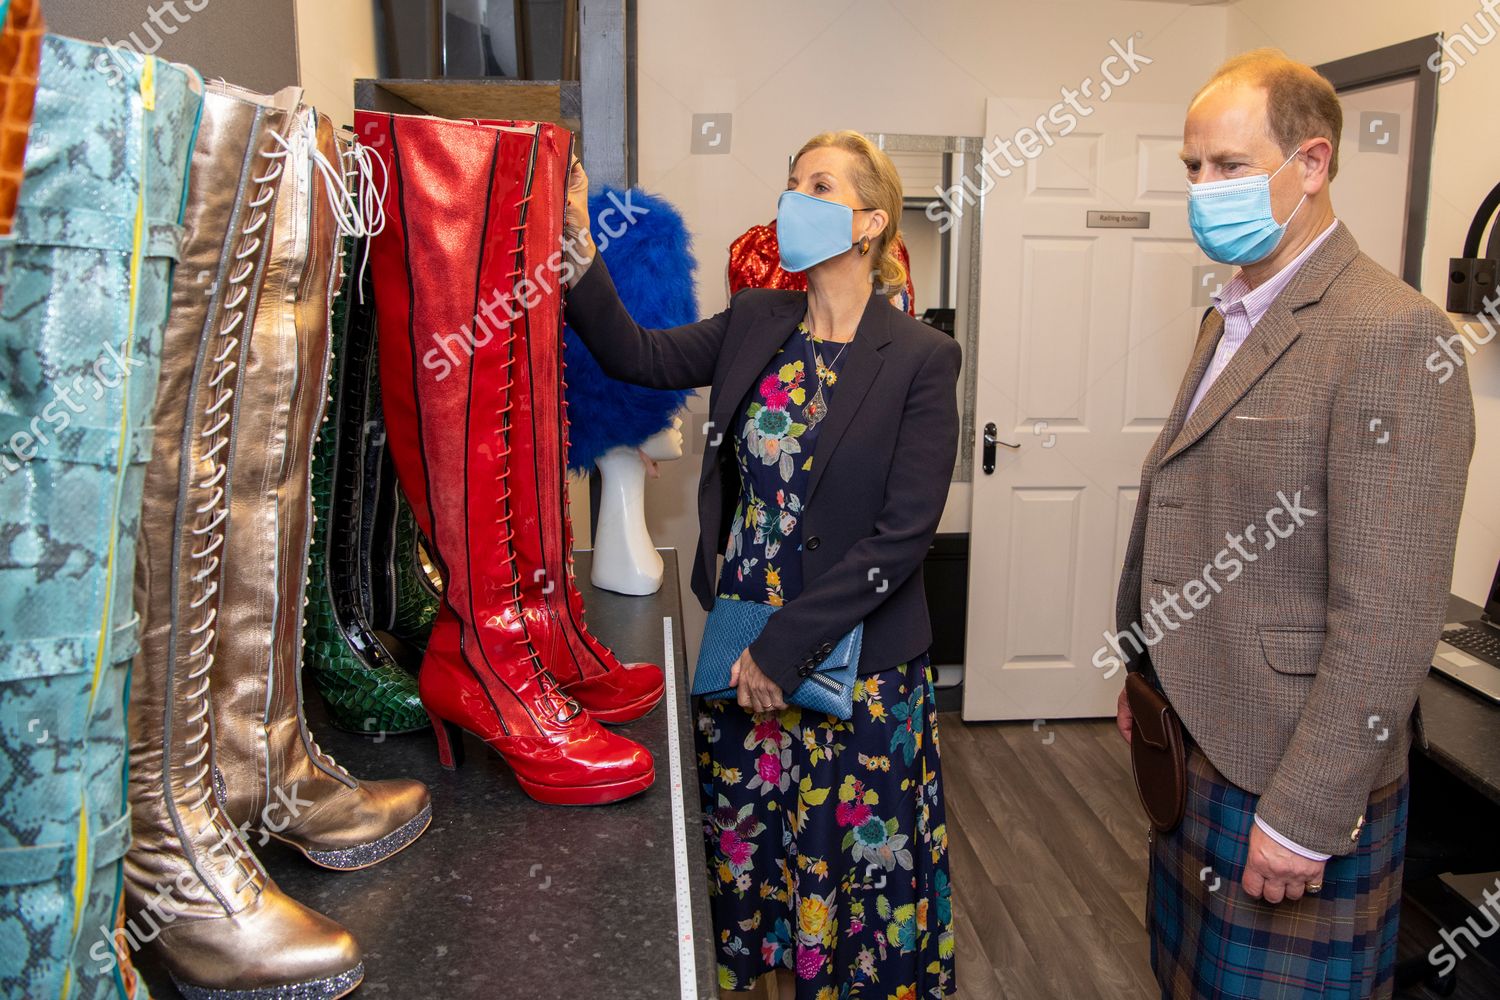 prince-edward-and-sophie-countess-of-wessex-visit-to-utopia-costumes-forfar-scotland-uk-shutterstock-editorial-12172309bk.jpg